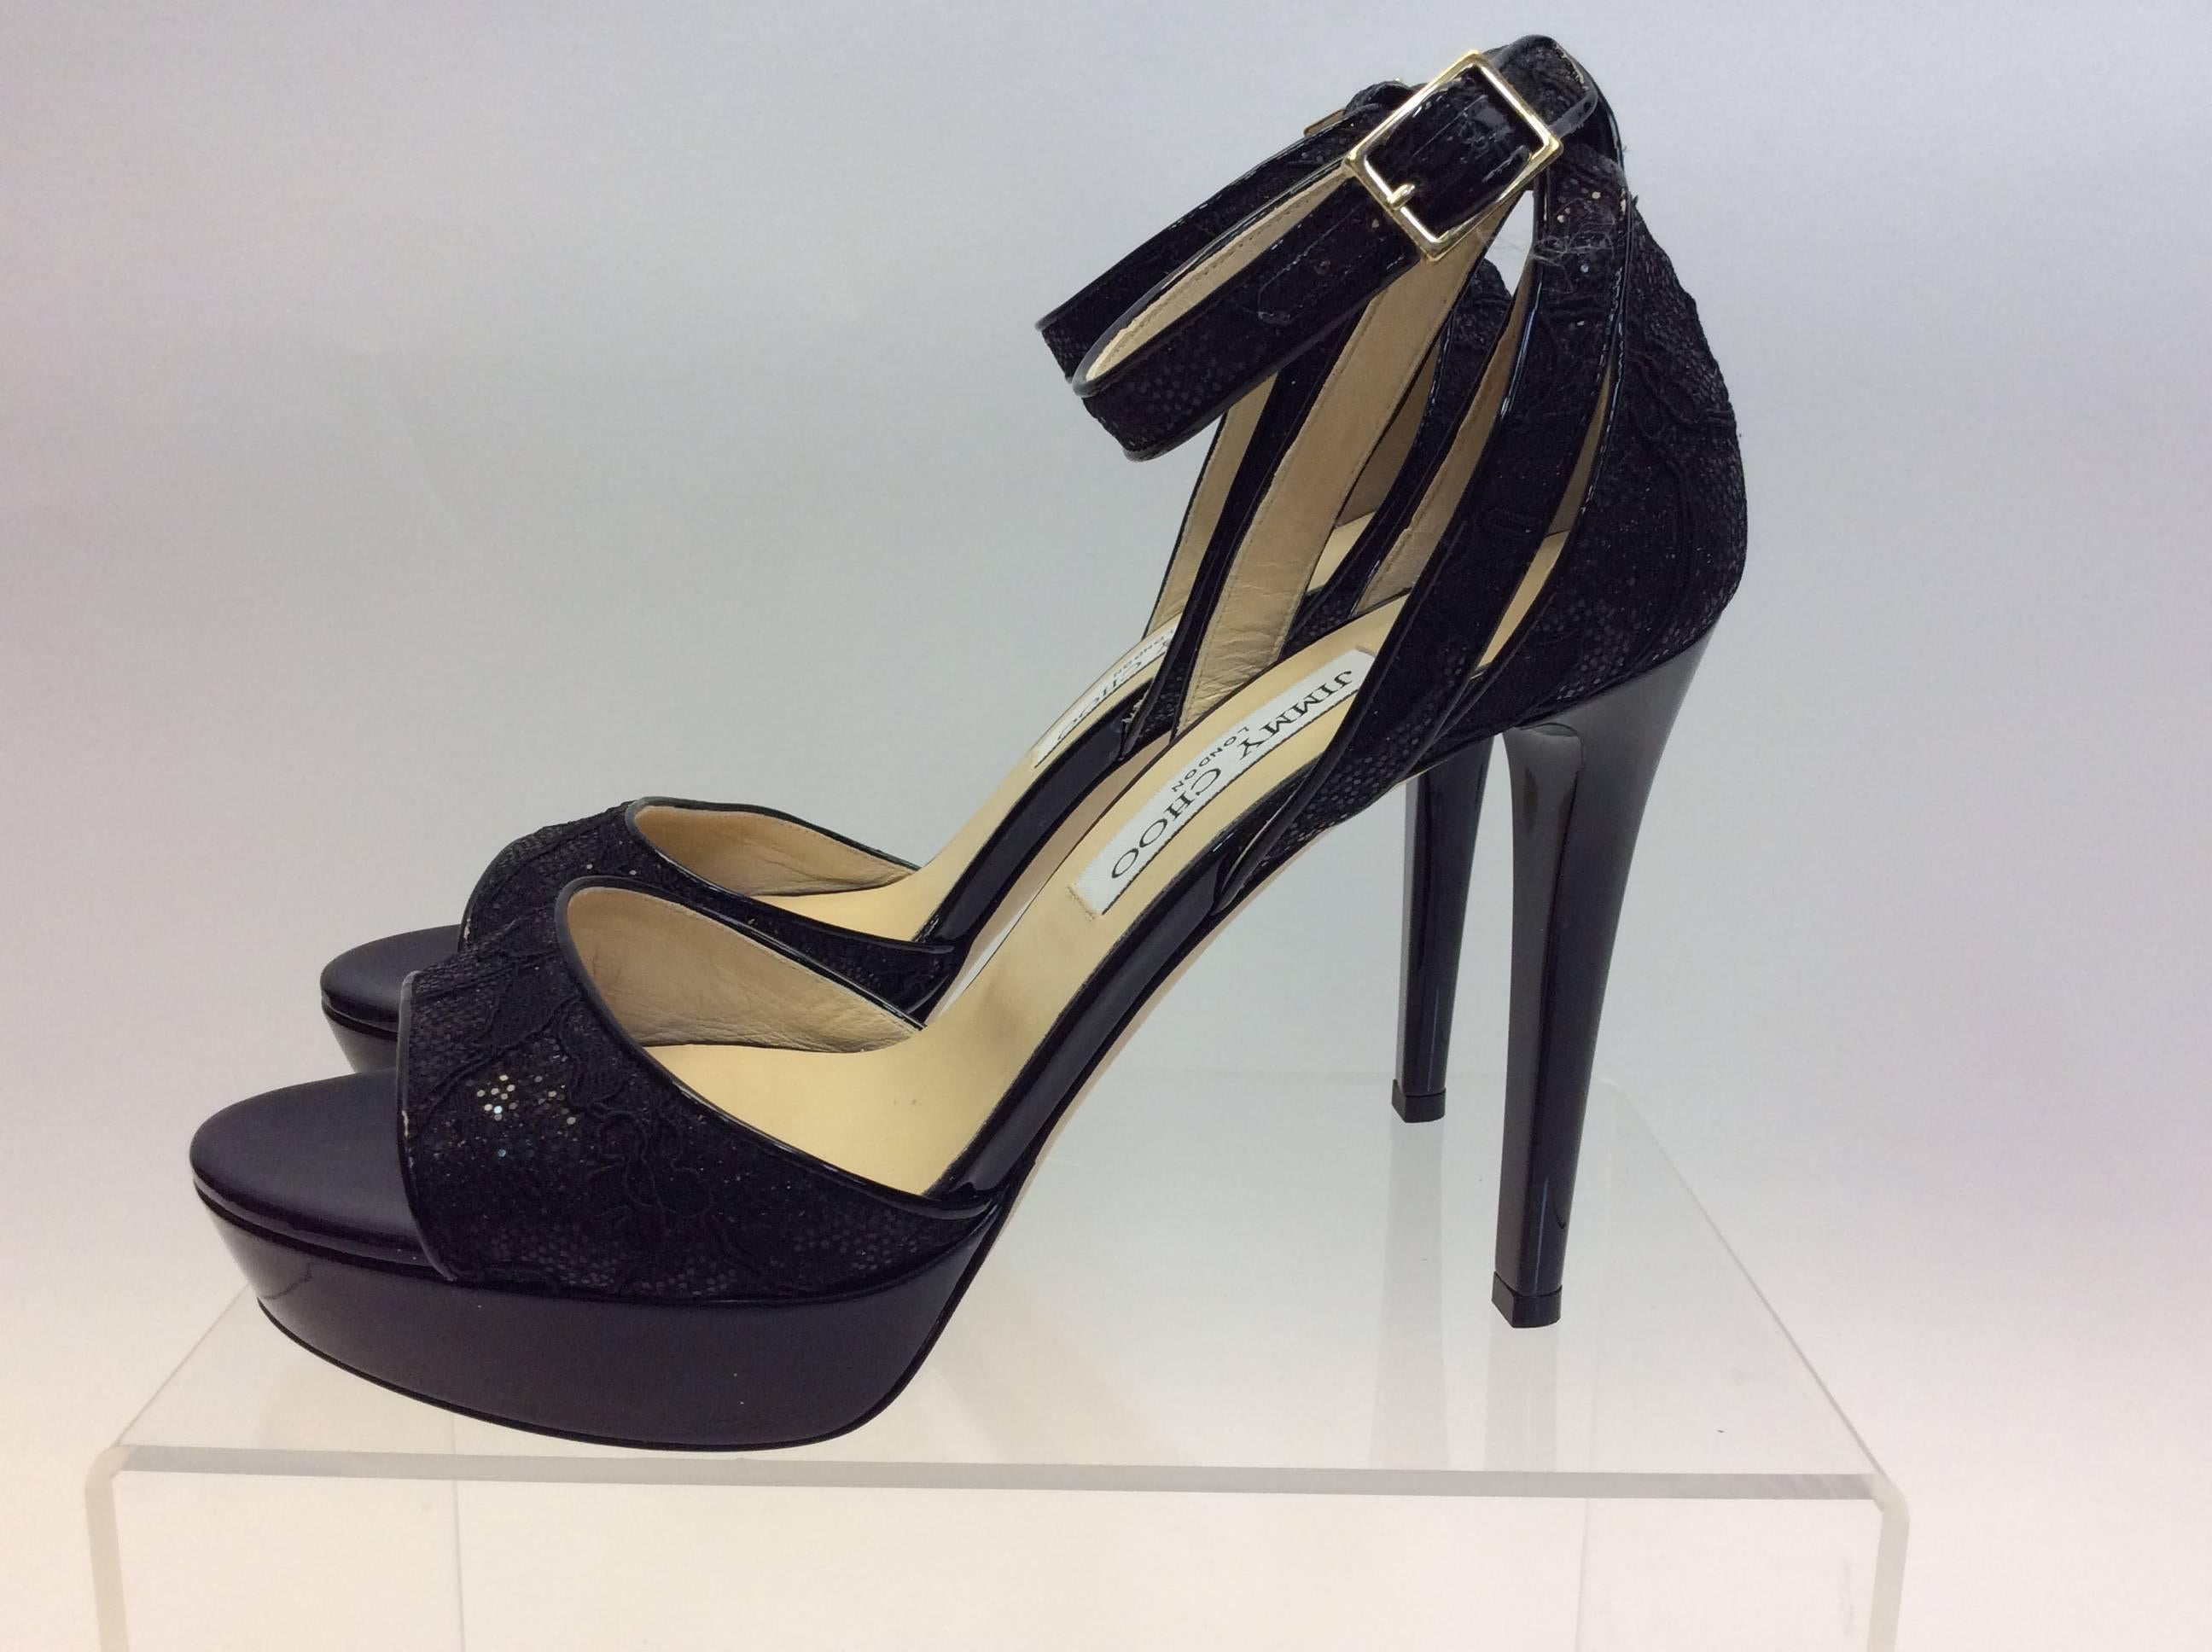 Jimmy Choo Black Formal Sandal
$499
Made in Italy
Size 39
1